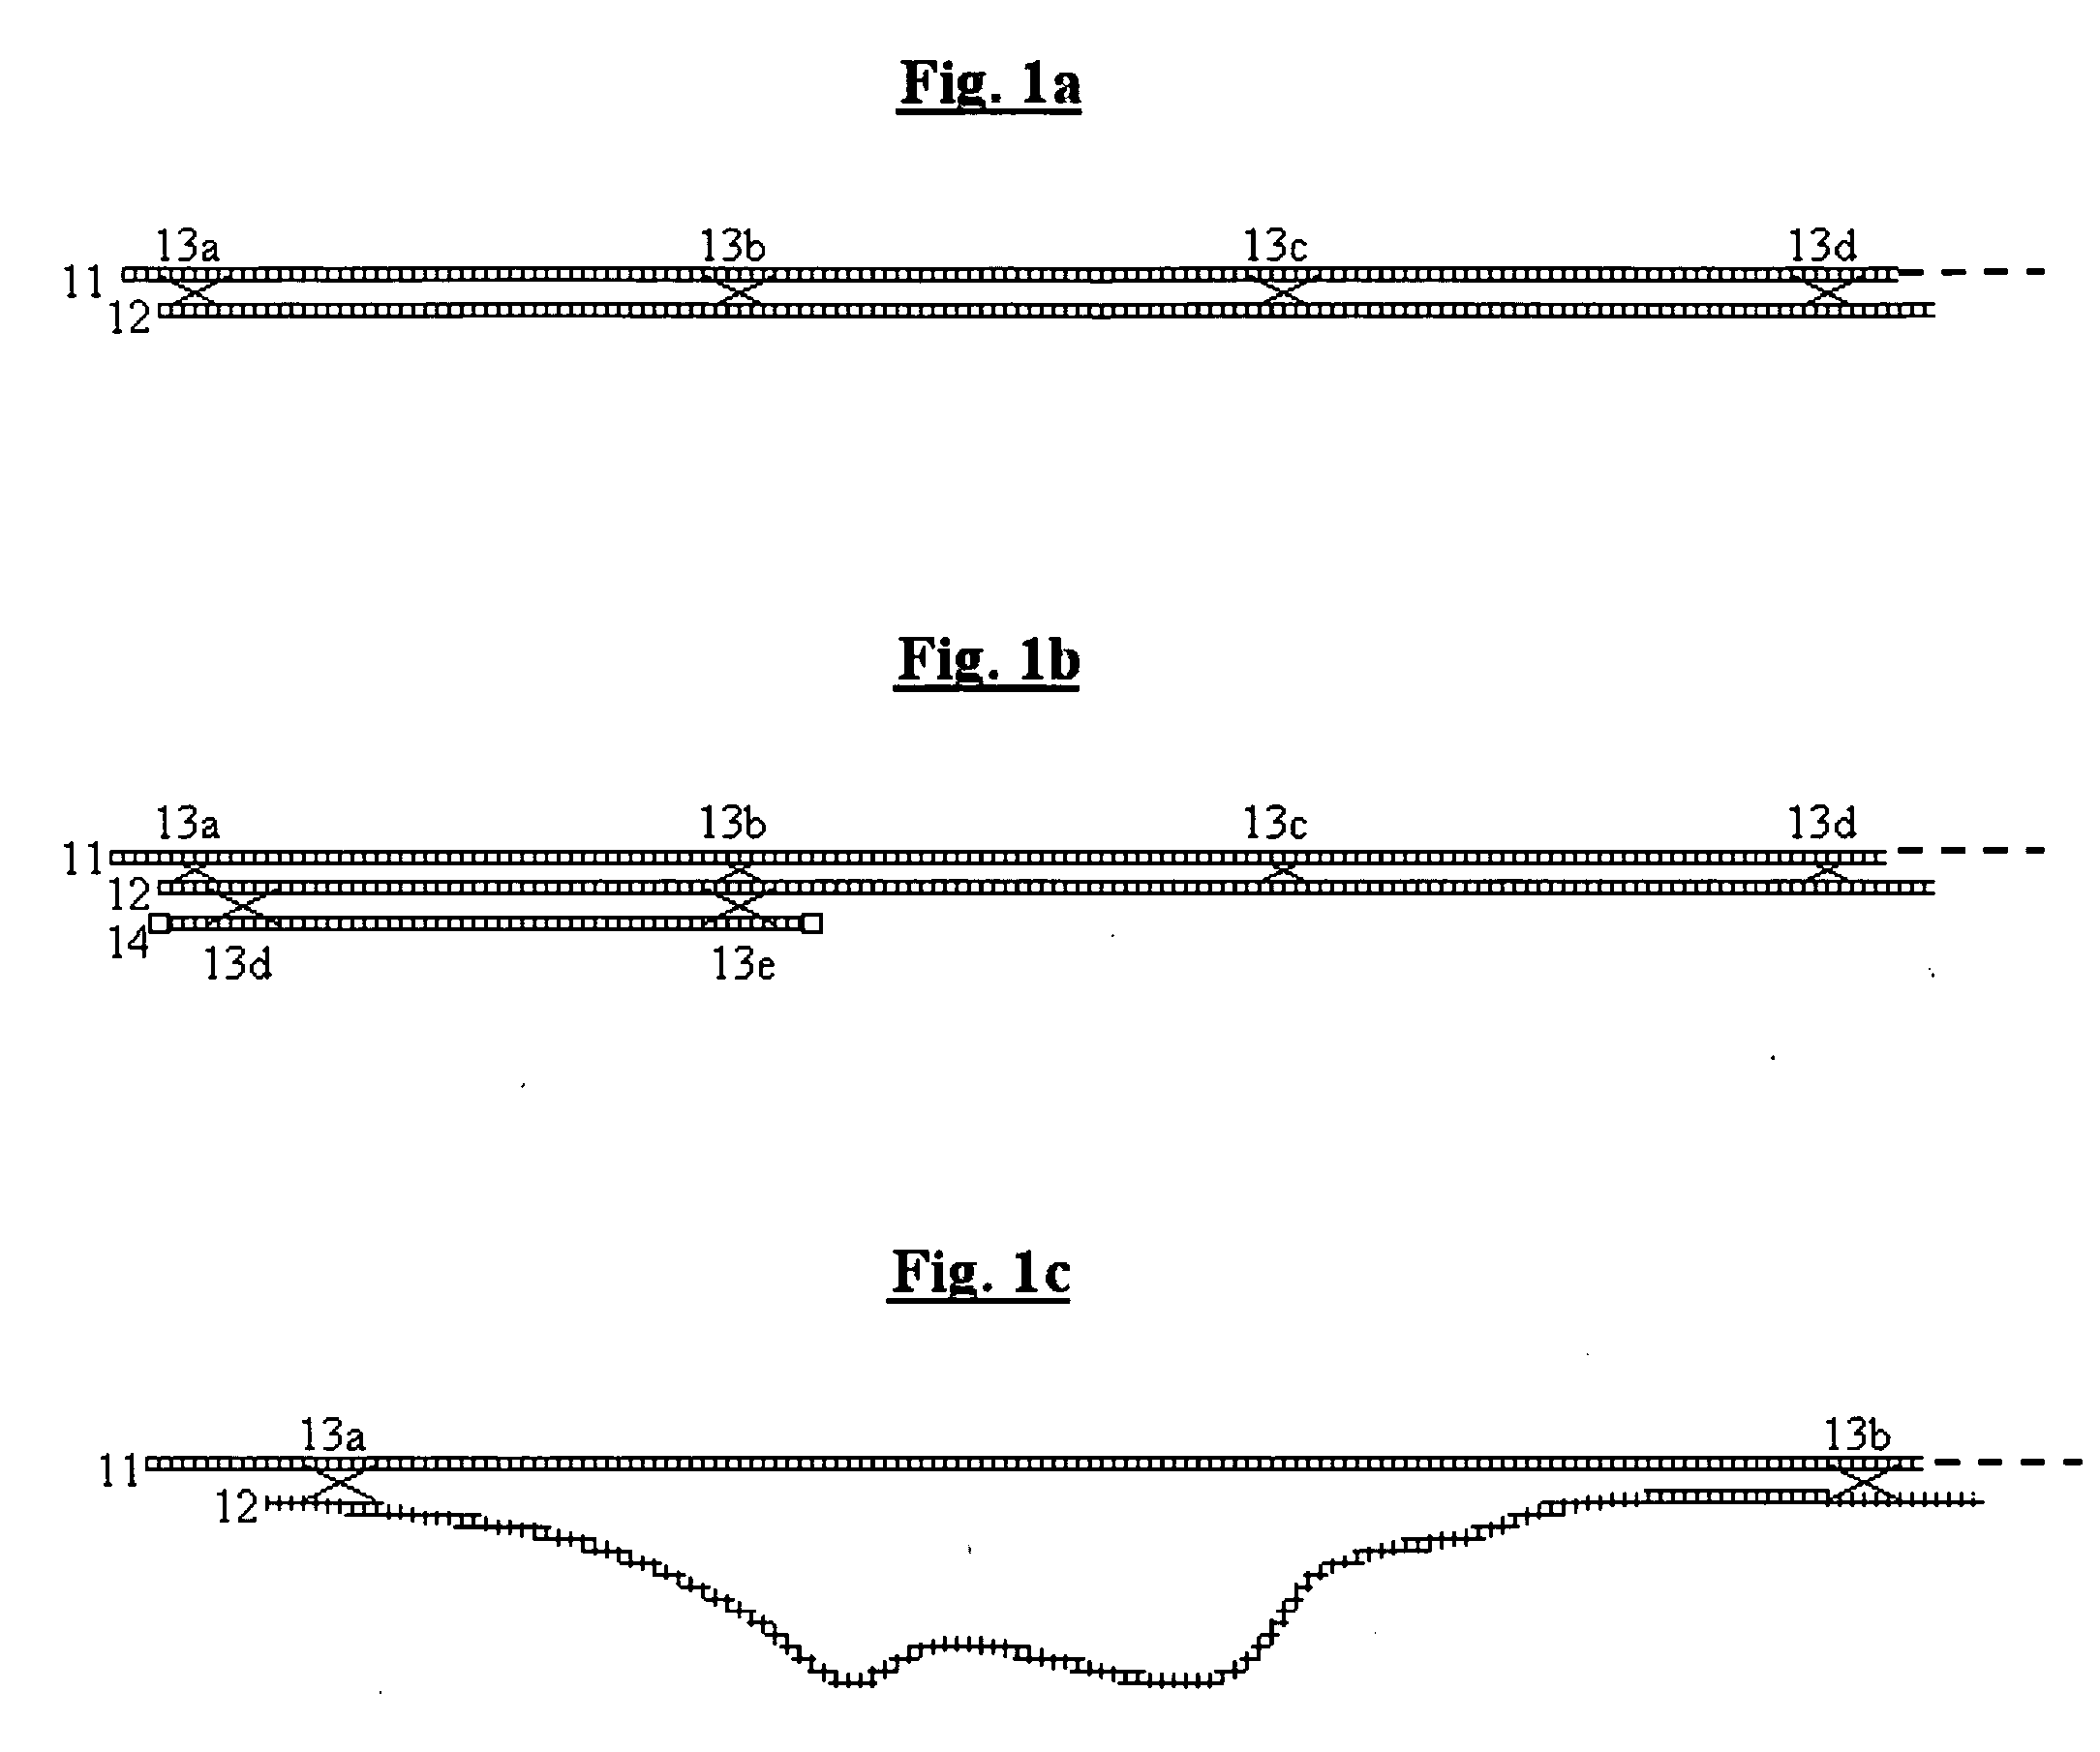 System and method for boarding and letting off passengers in trains efficiently so that the train does not have to stop at the stations